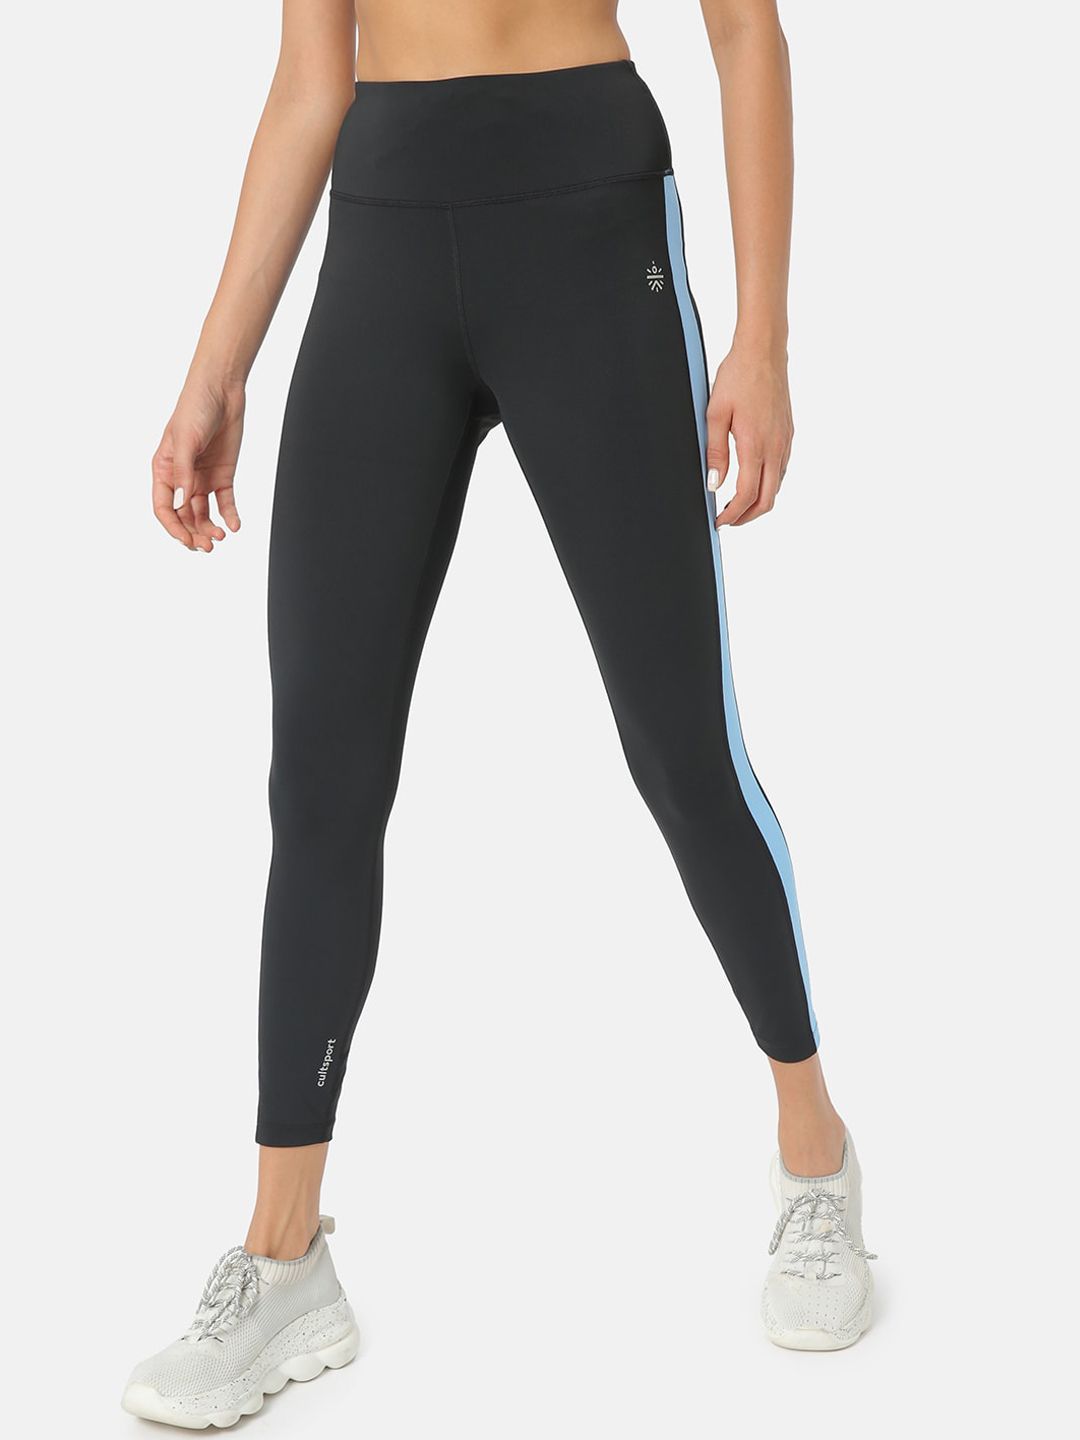 Cultsport Women Black Solid Antimicrobial Training Tights Price in India